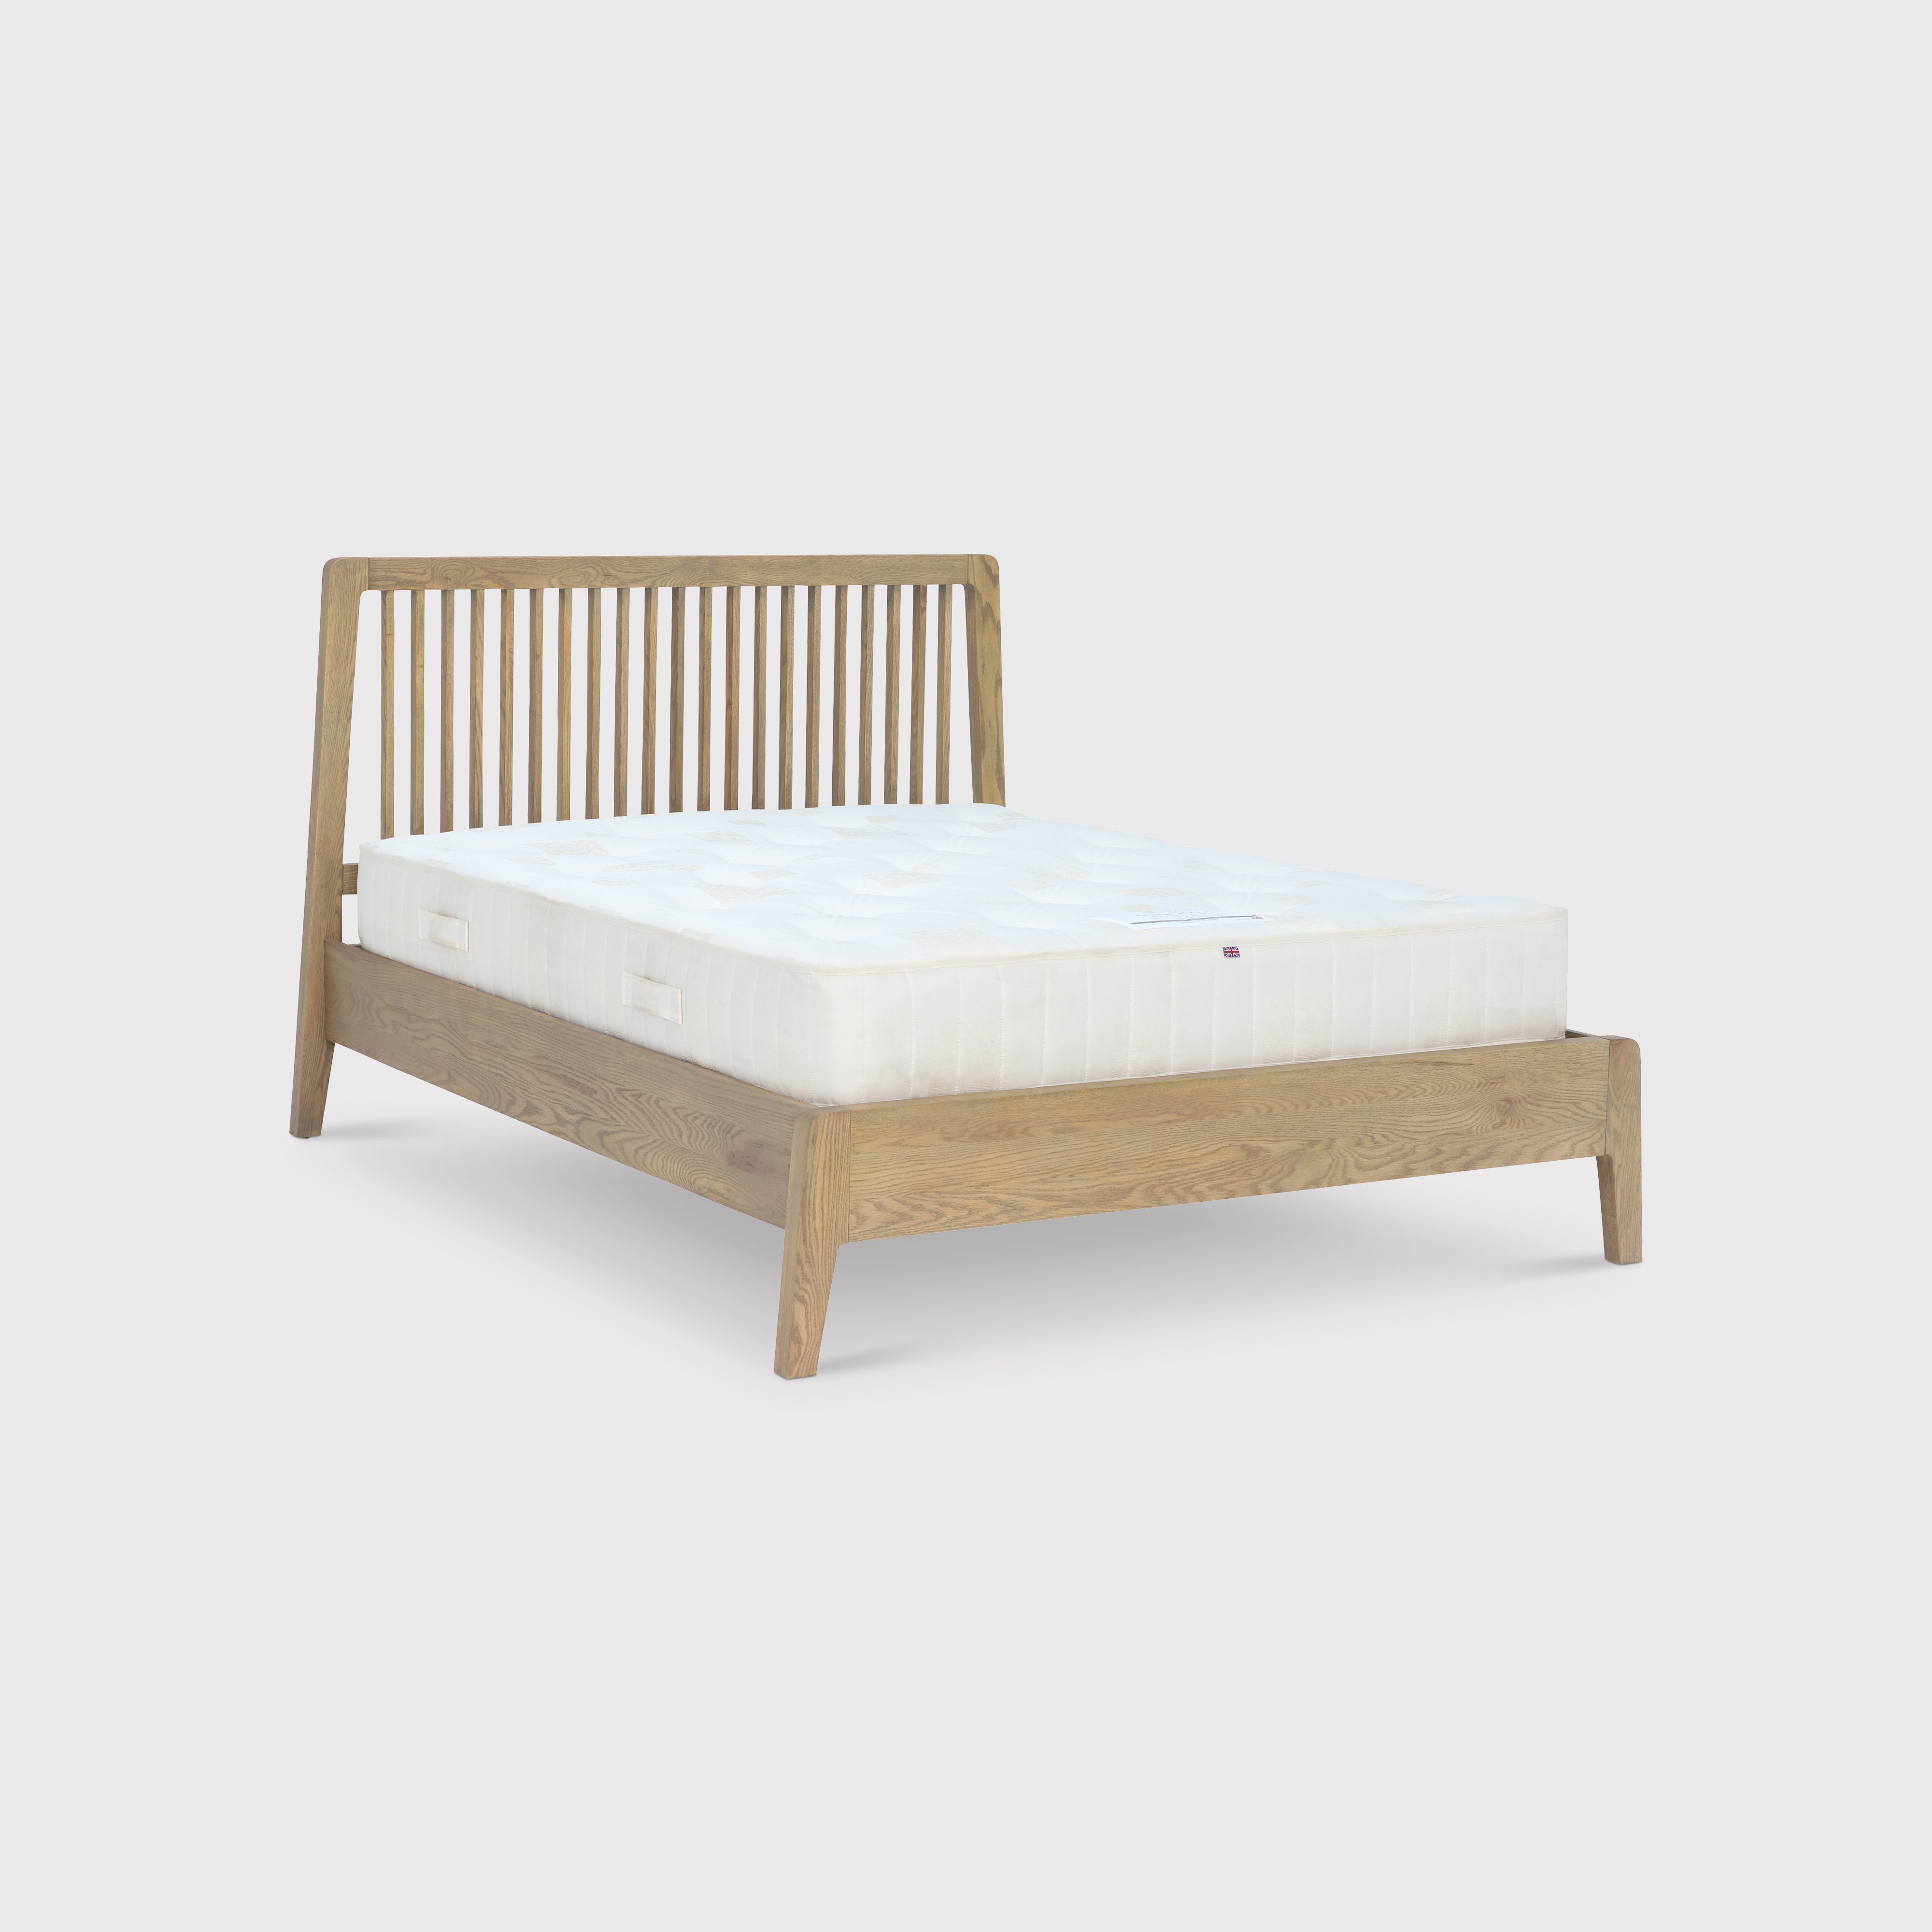 Runswick 135cm Bed Frame, Brown | Double | Barker & Stonehouse